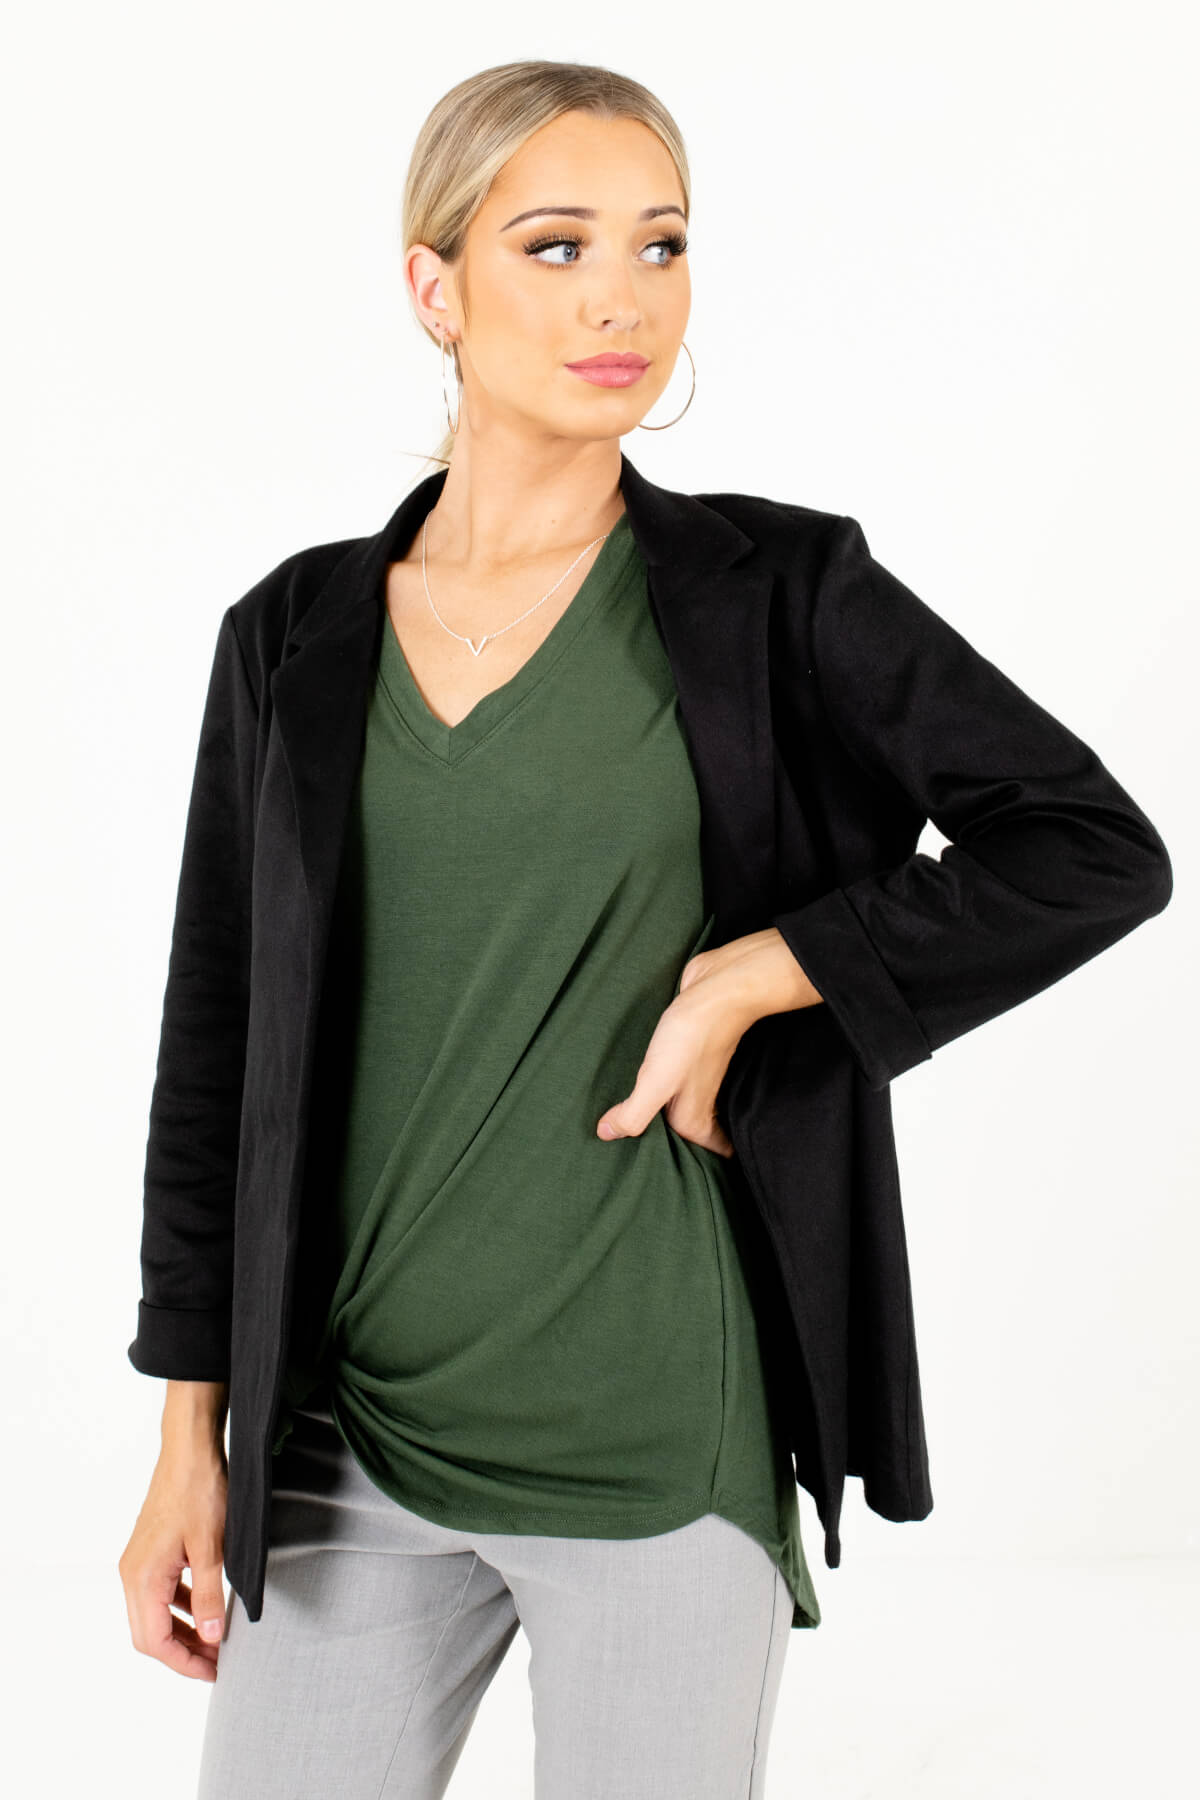 Green Cute and Comfortable Boutique Tops for Women